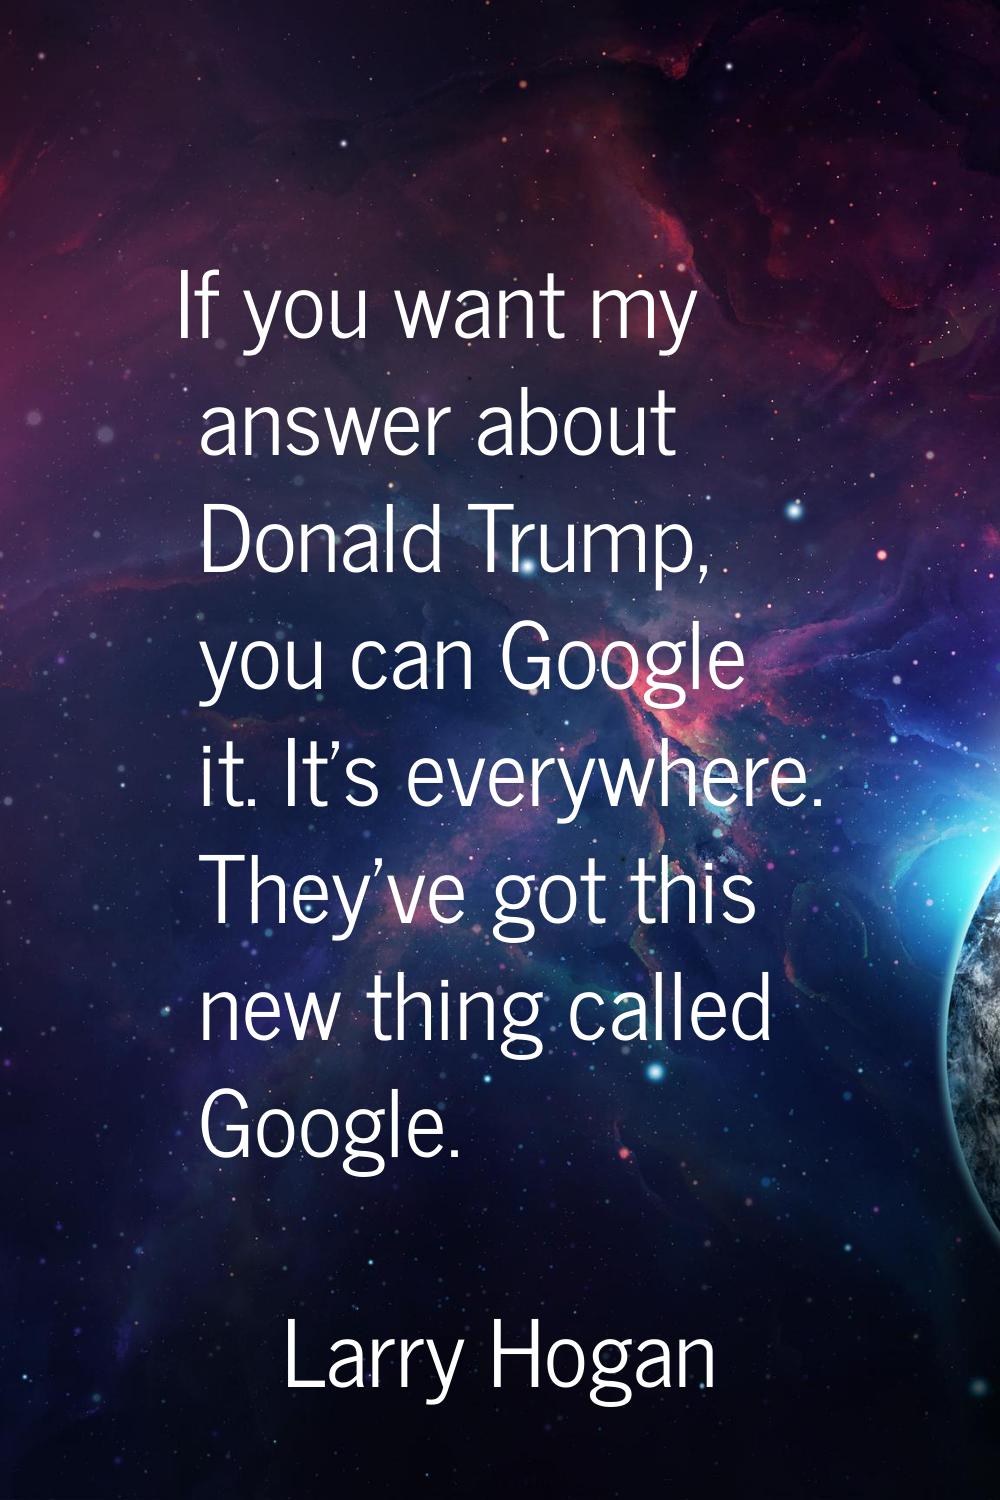 If you want my answer about Donald Trump, you can Google it. It's everywhere. They've got this new 